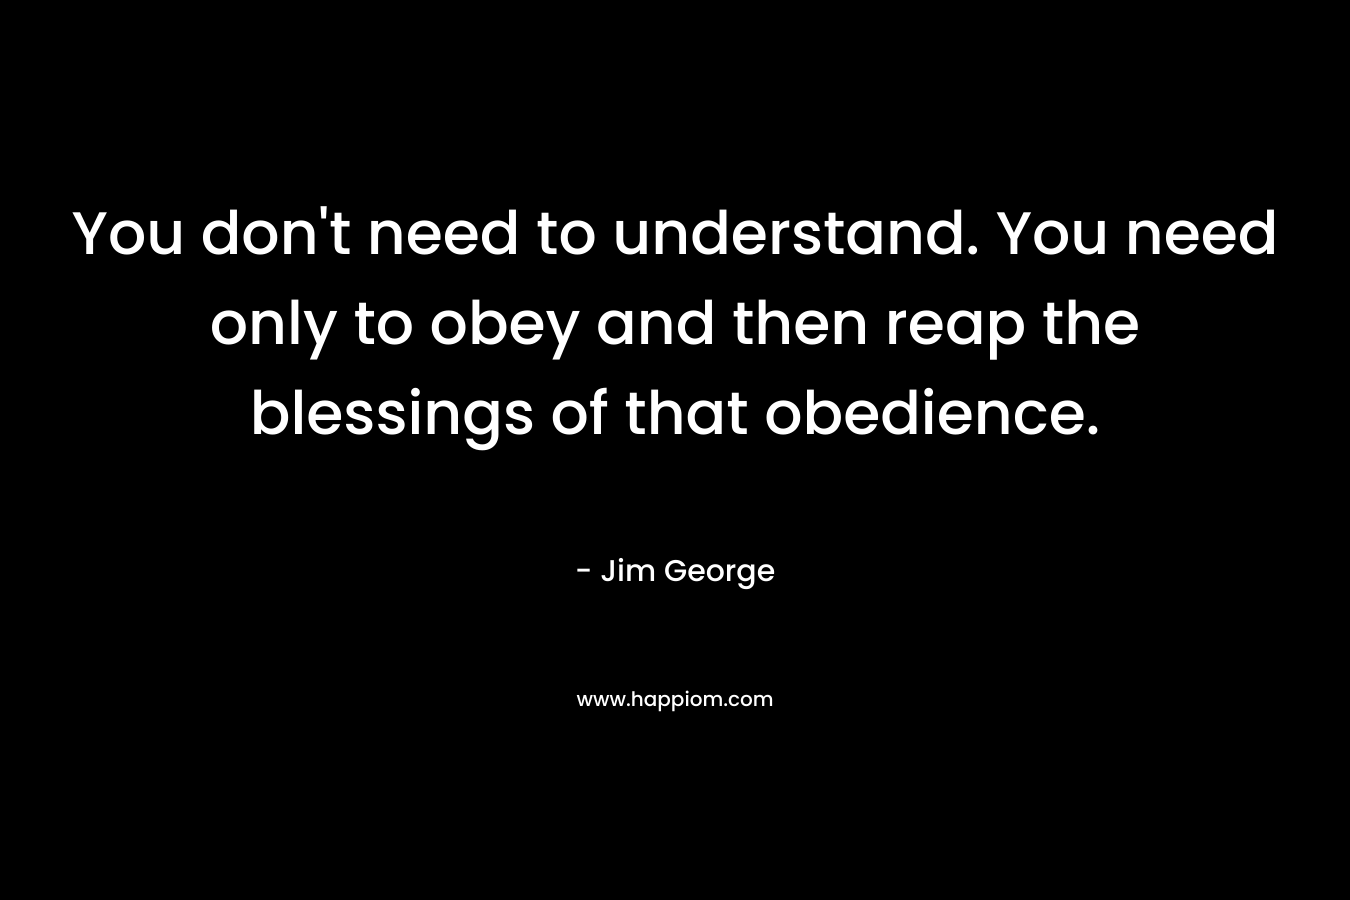 You don’t need to understand. You need only to obey and then reap the blessings of that obedience. – Jim George